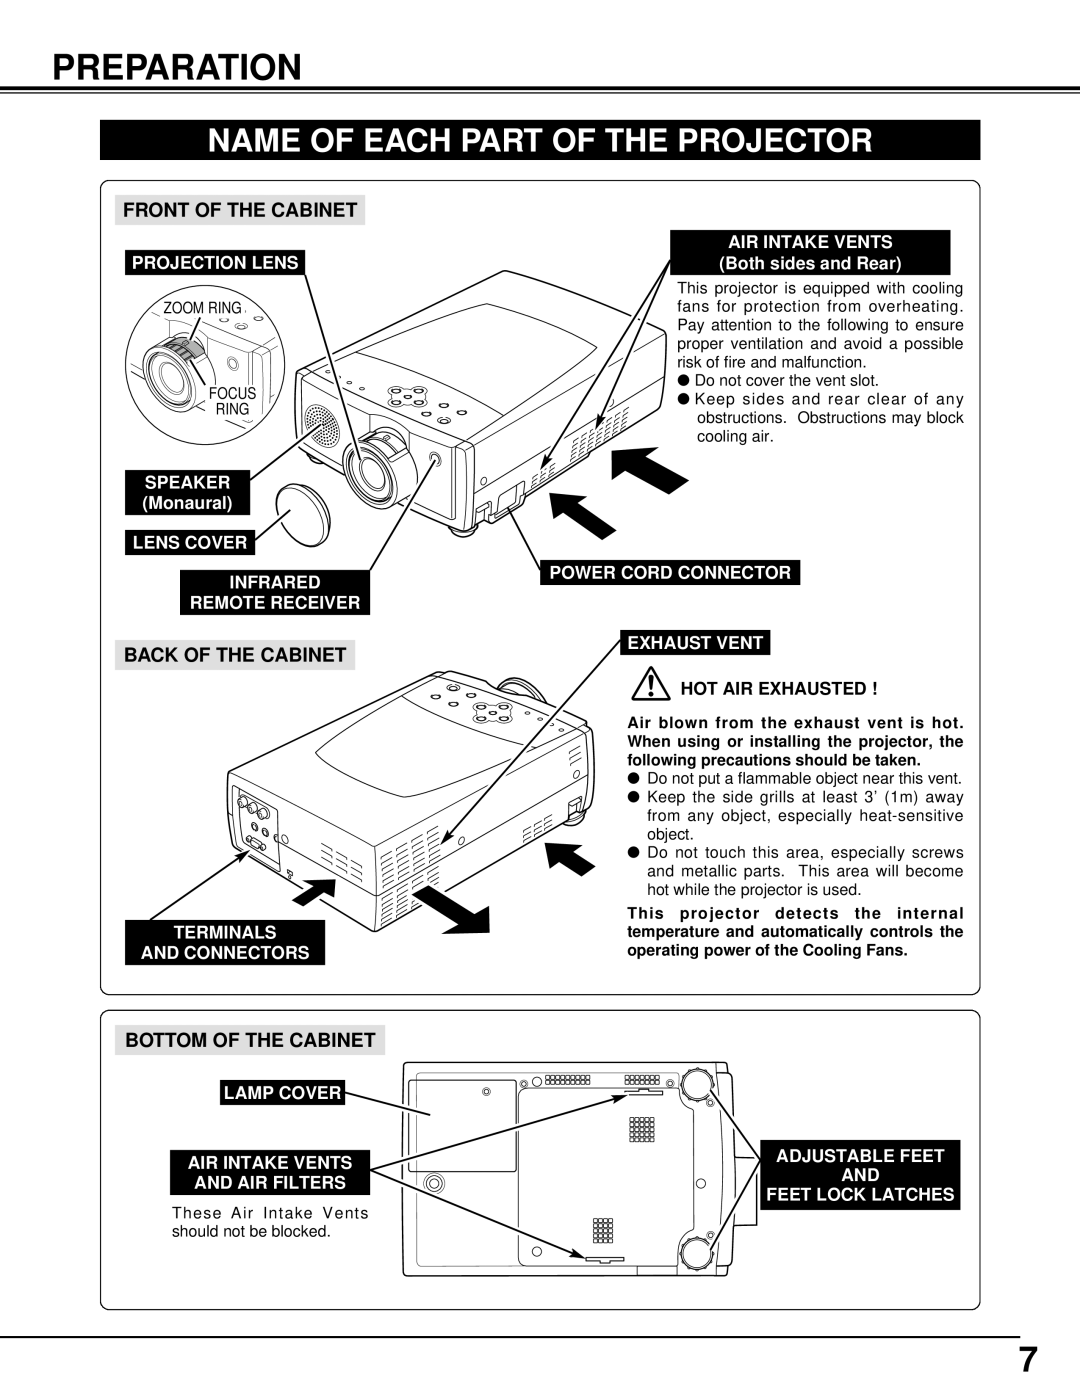 Canon 5100 owner manual Preparation, Name Of Each Part Of The Projector, Front Of The Cabinet, Hot Air Exhausted 